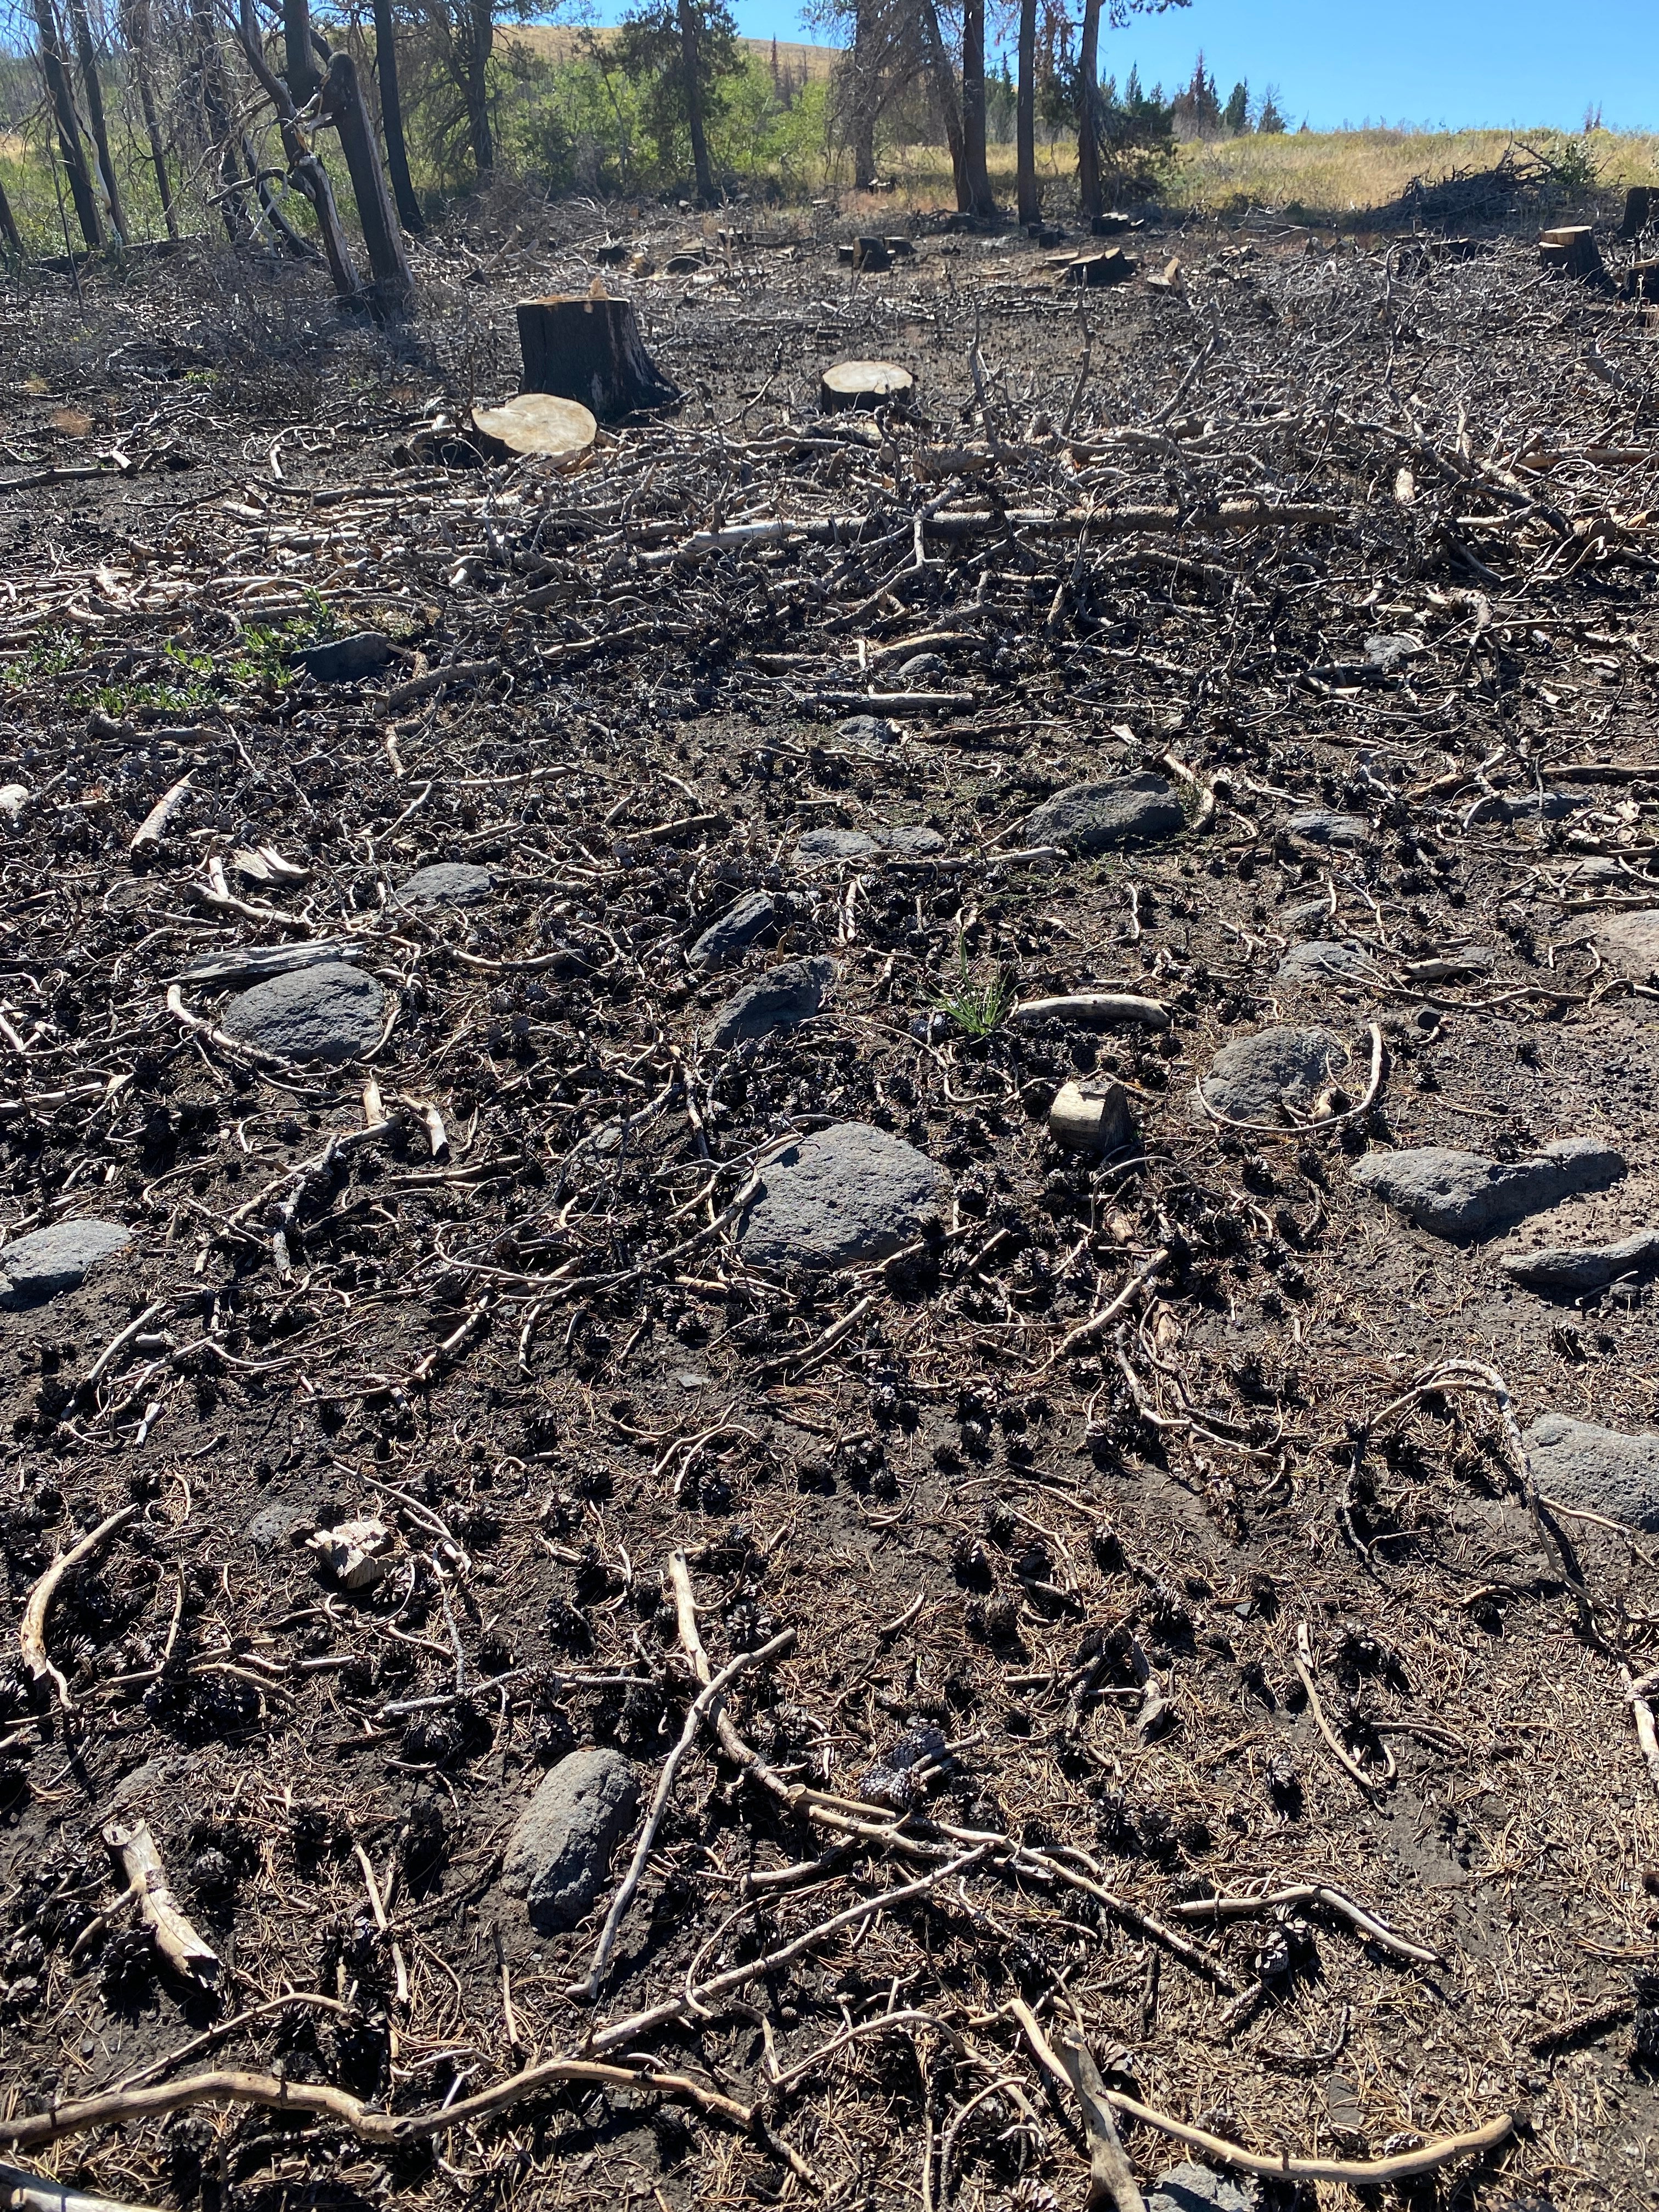 charred brown earth is scattered with broken twigs and loose cones. In the background you can see stumps from three or four large snags that have been cut off. In the distance are standing snags of burned trees